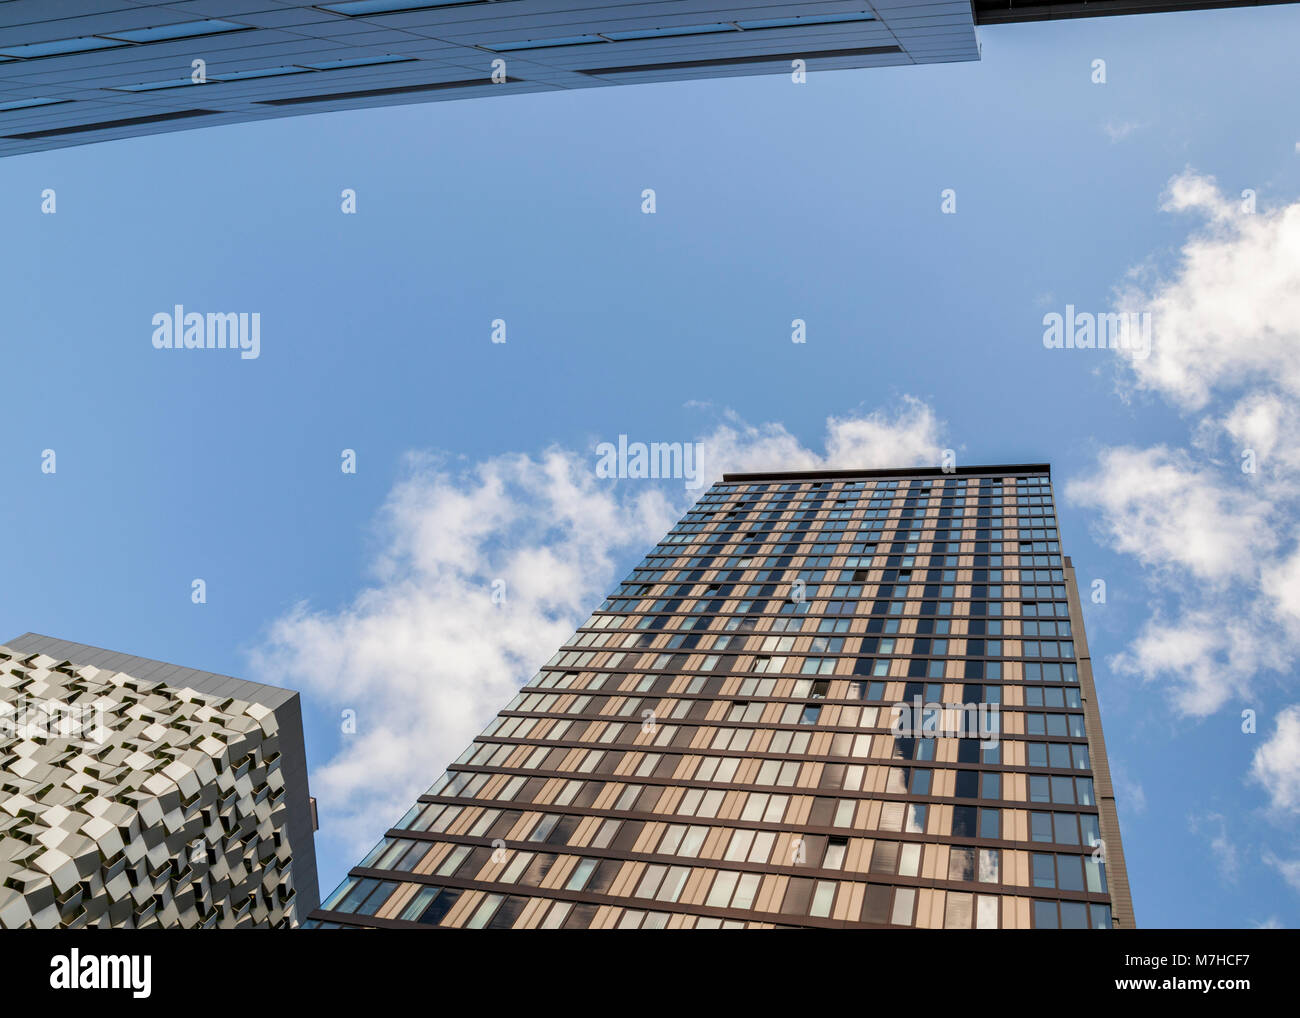 Looking up between modern tall buildings in Sheffield, England, UK Stock Photo